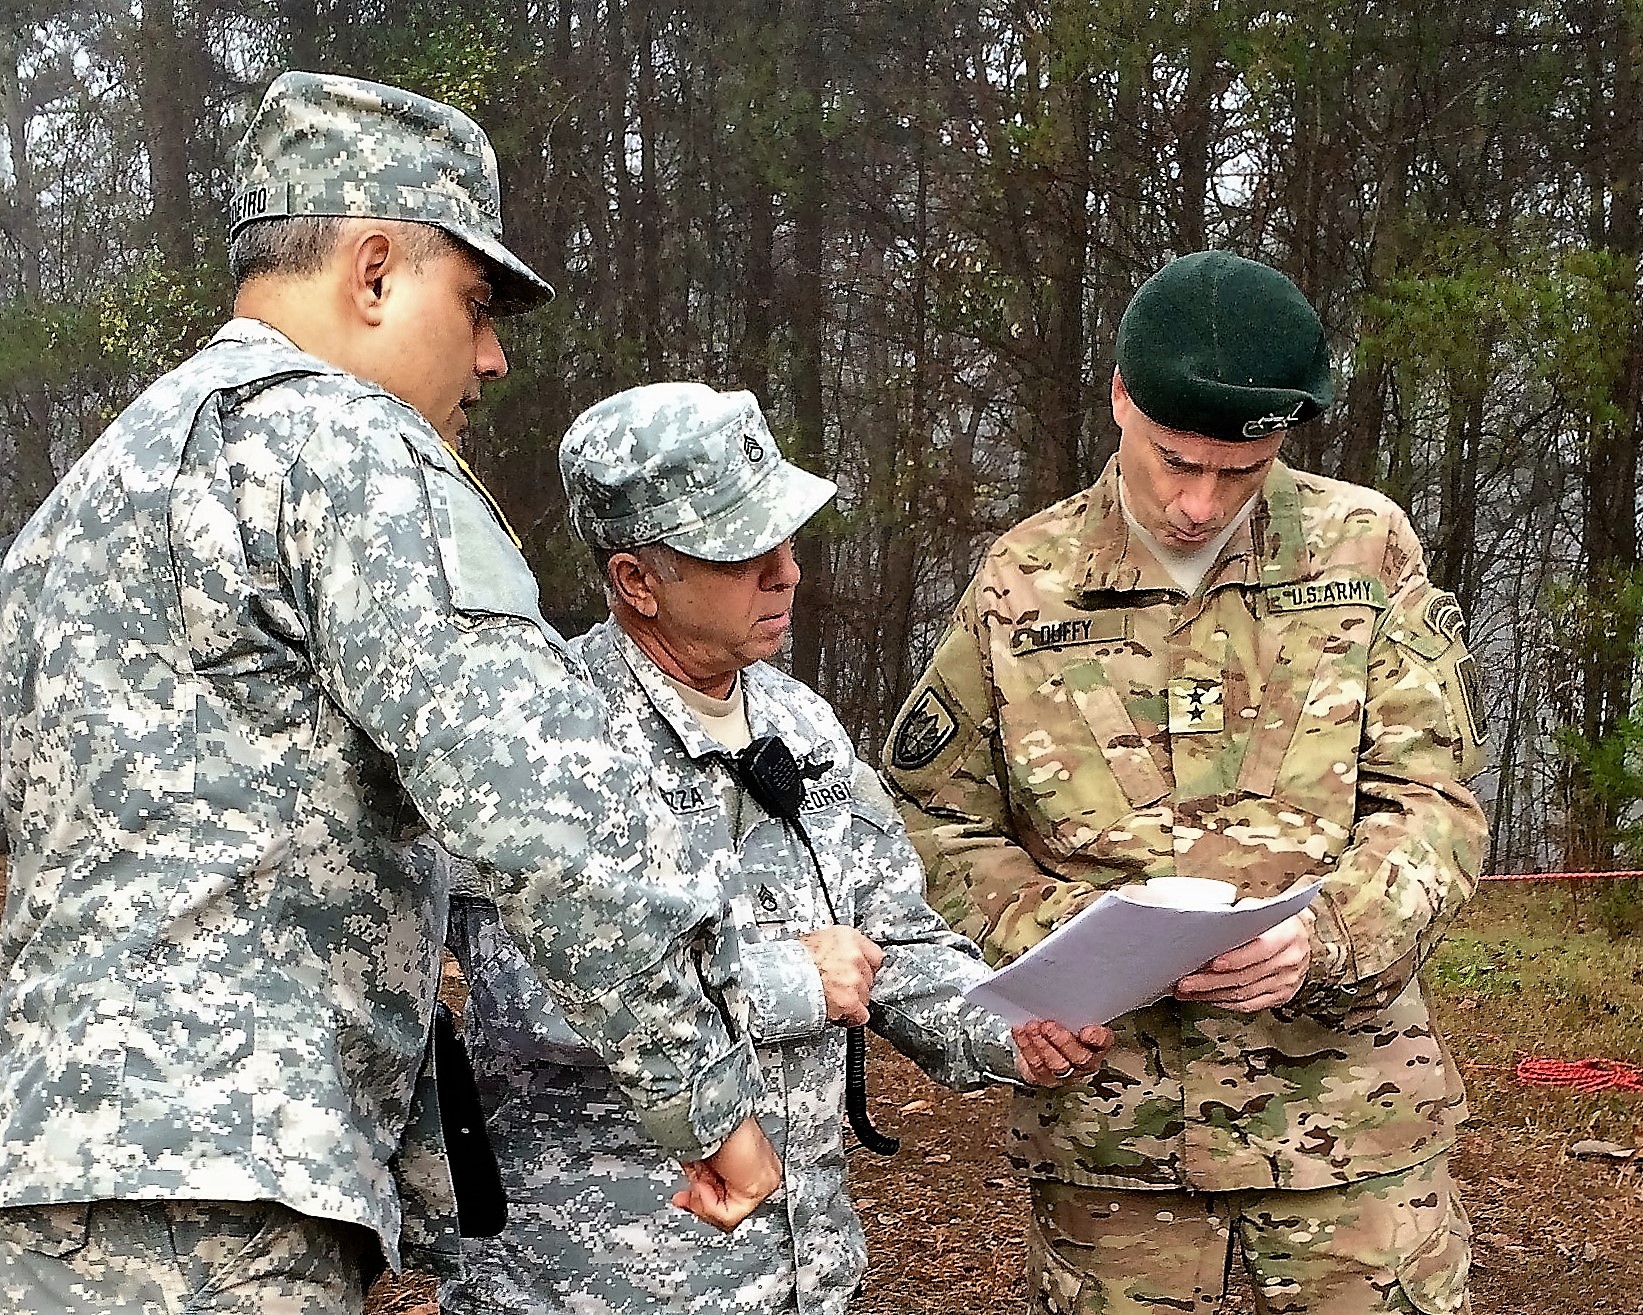 GEORGIA NATIONAL CEMETERY, Canton, Georgia, December 12, 2015 – Capt. Anazion Cordeiro (left) and Staff Sgt. Richard Carrozza (center) provide an overview of Georgia State Defense Force operations to Maj. Gen. William F. Duffy (right). (Georgia State Defense Force photo by Pvt. Michael Chapman, Public Affairs Office)